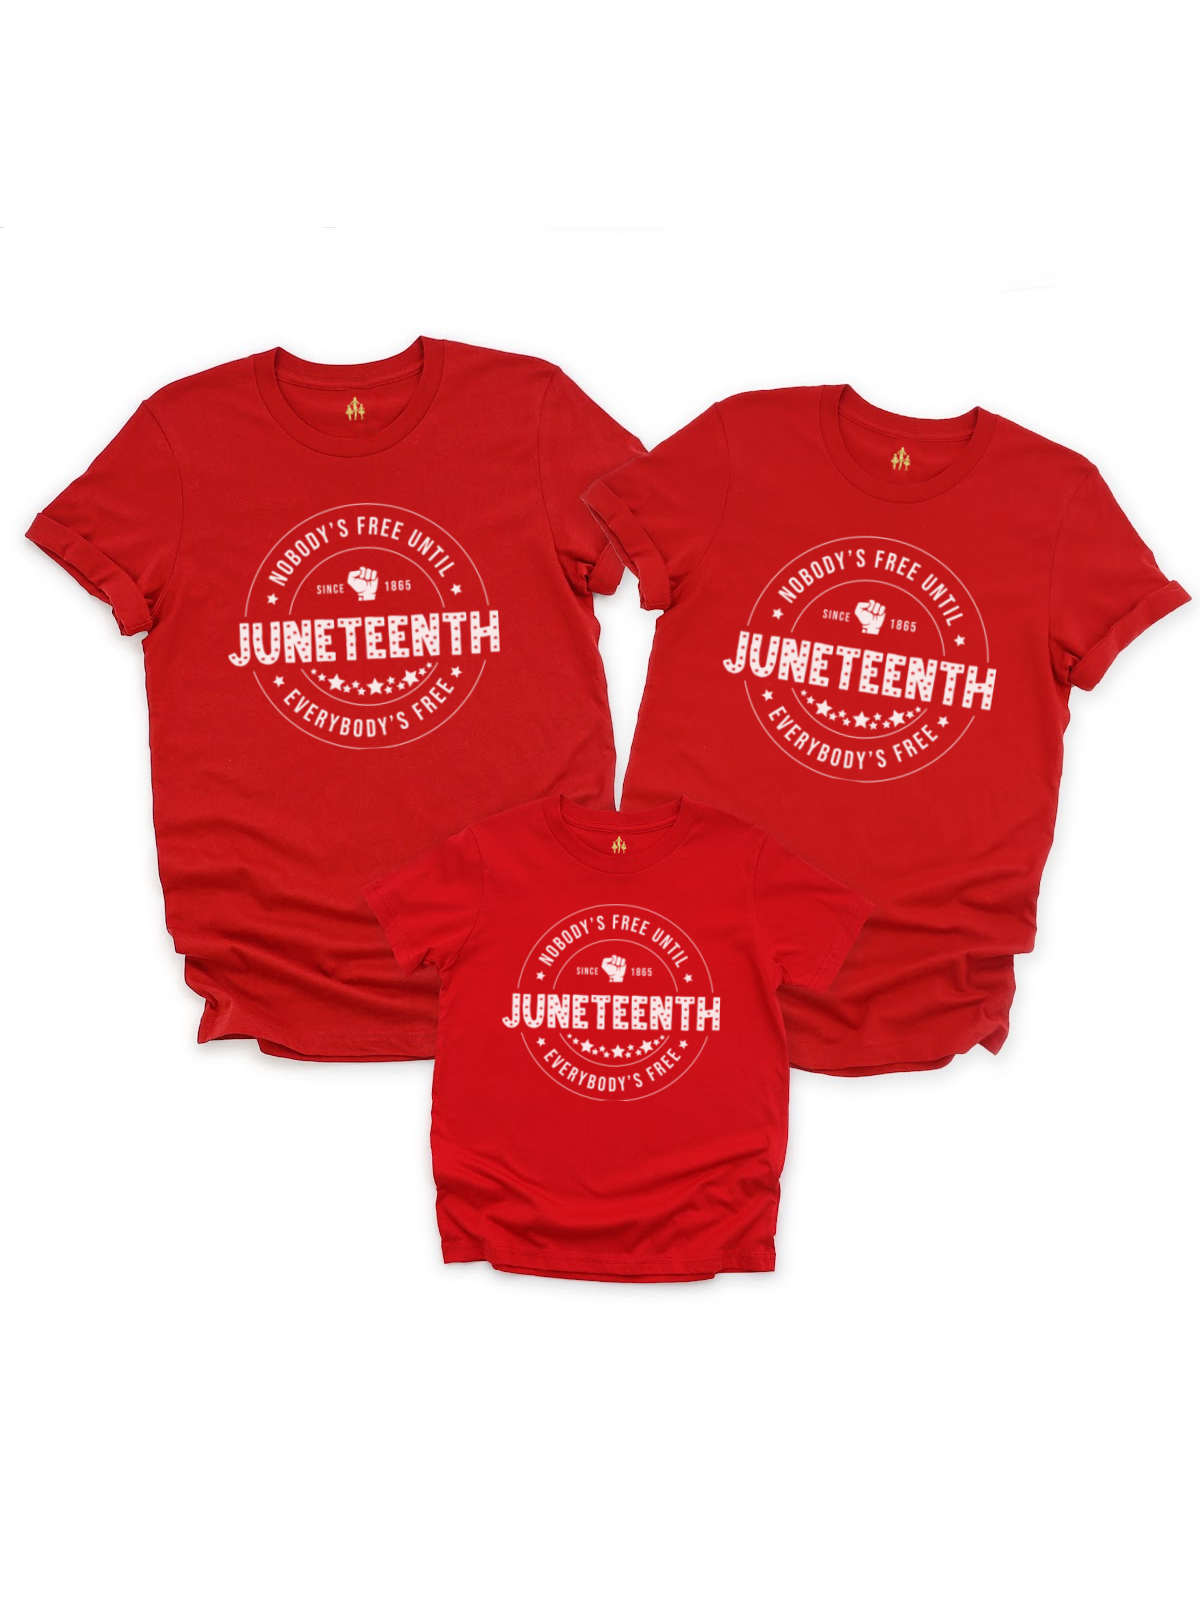 Matching Juneteenth Shirts for the Family - Red